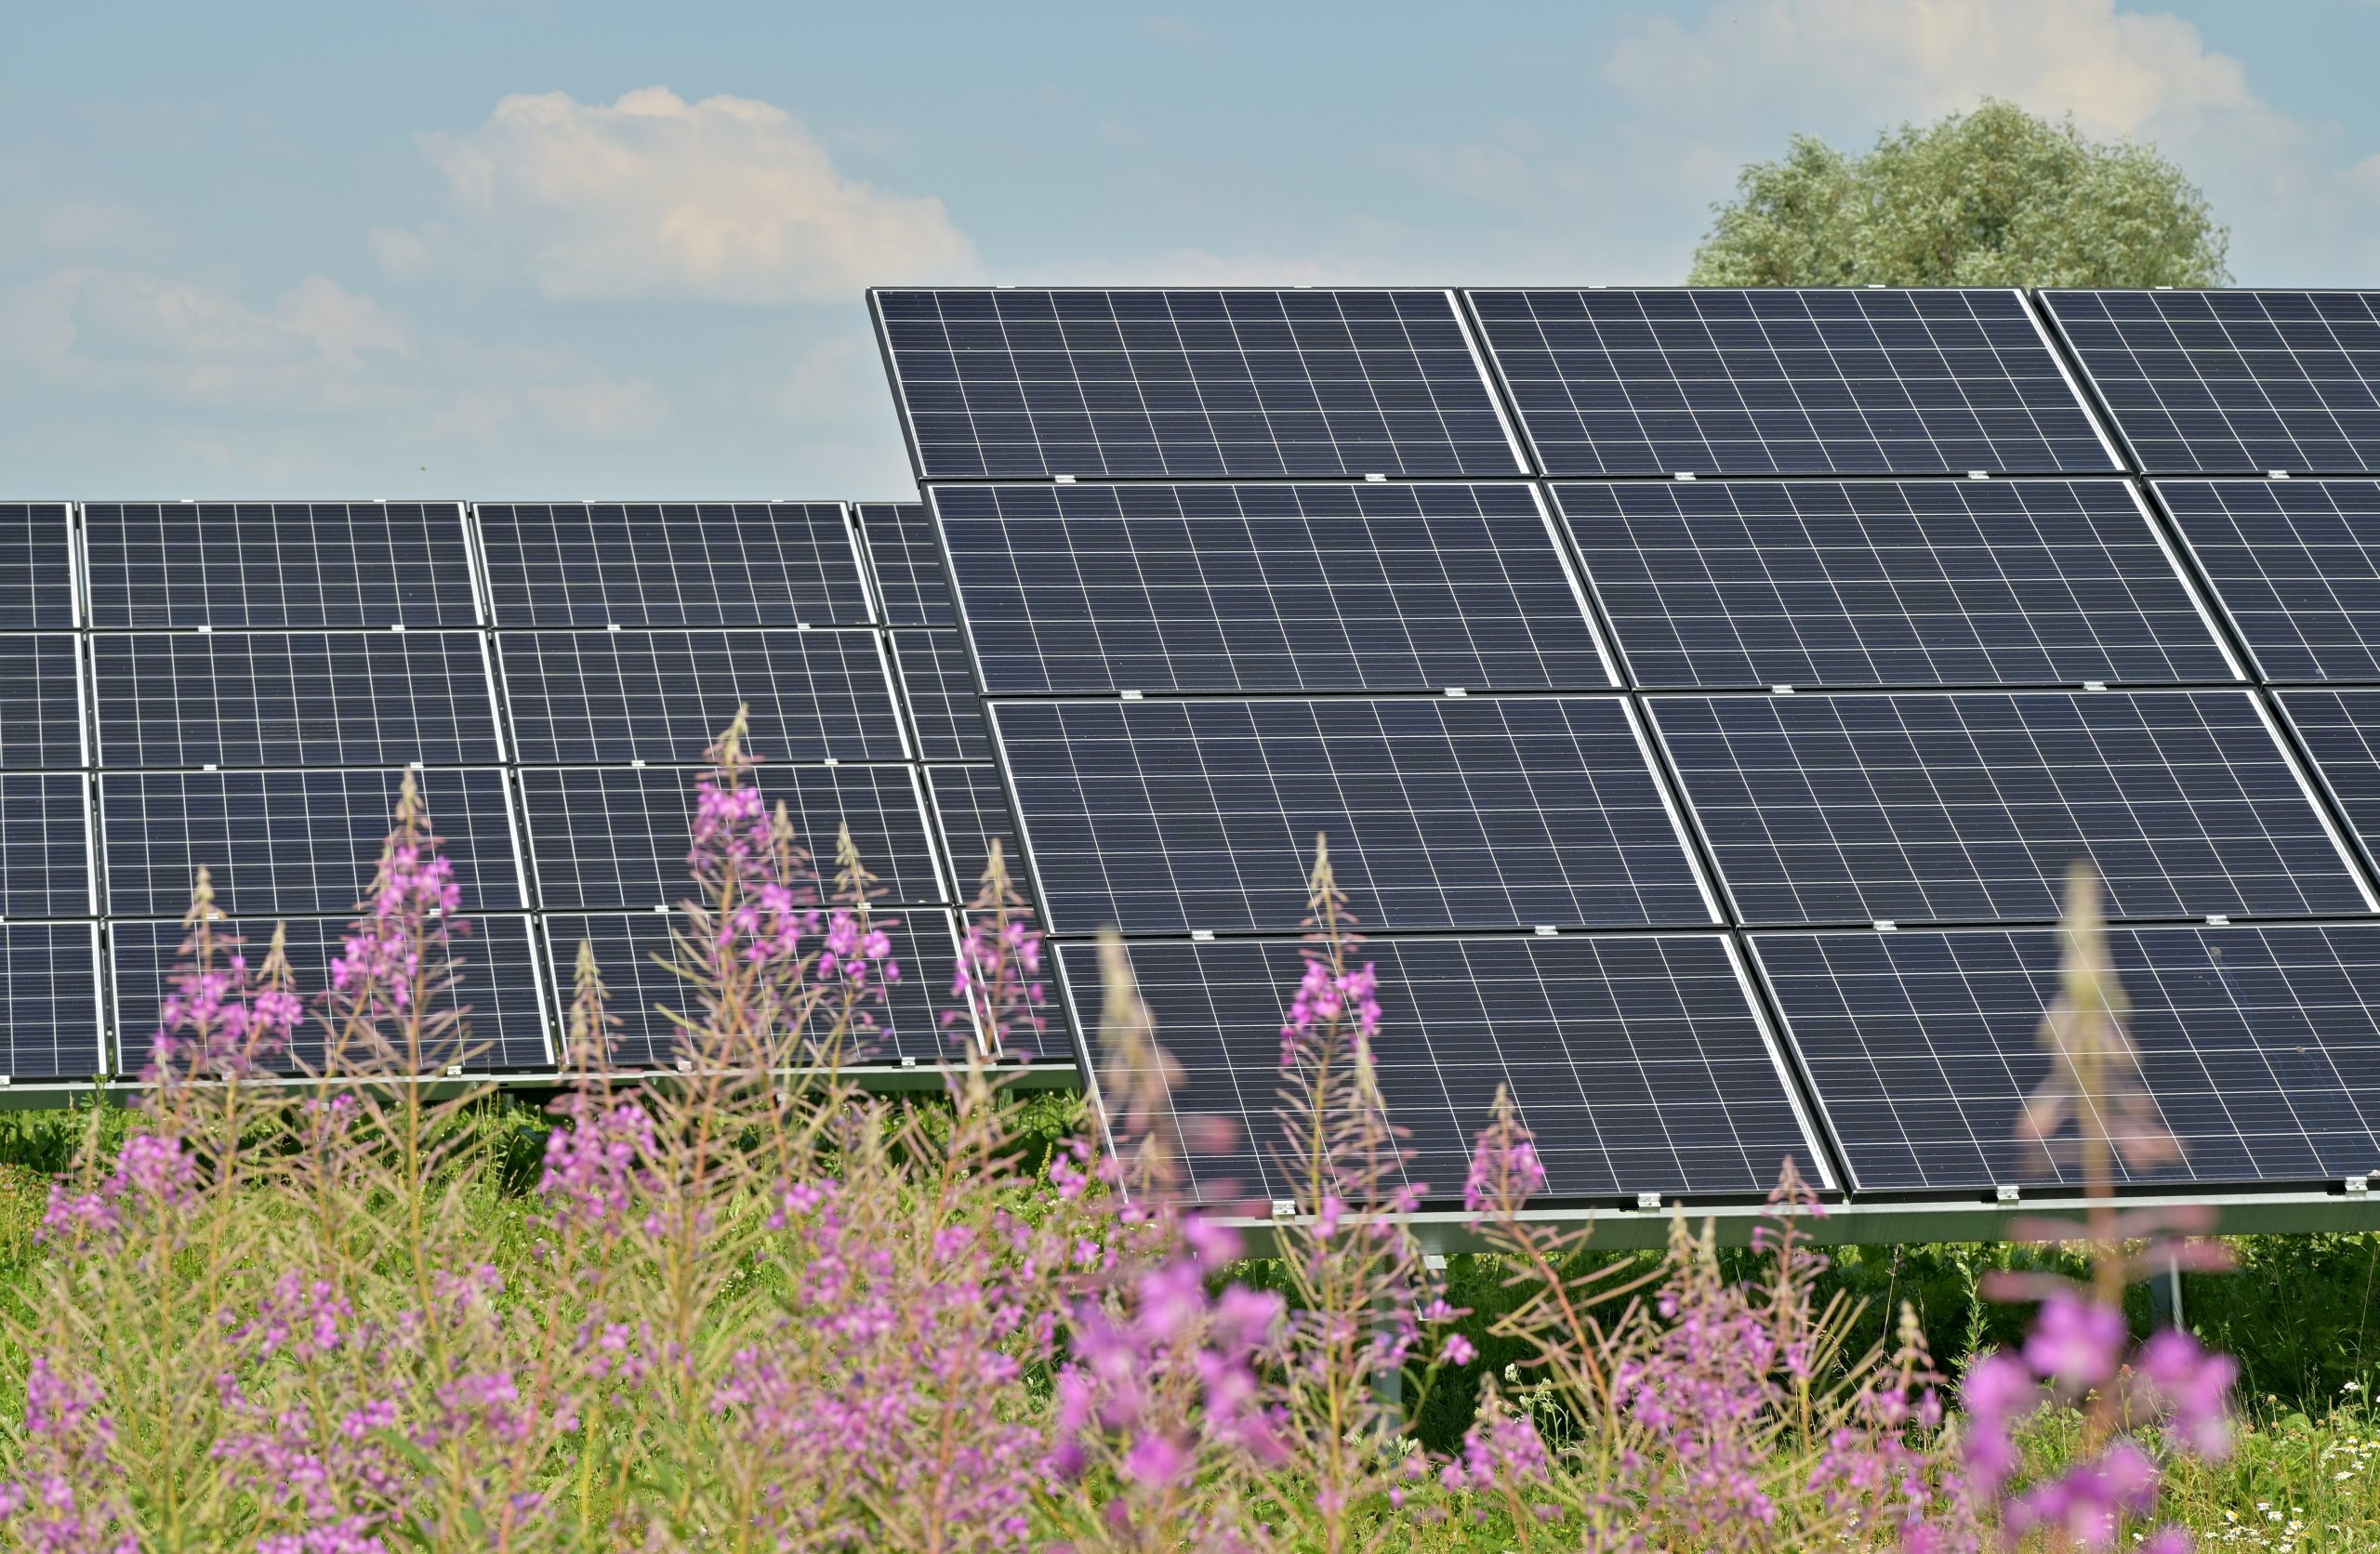 Consultation announced on new solar farm which could power over 57,000 homes